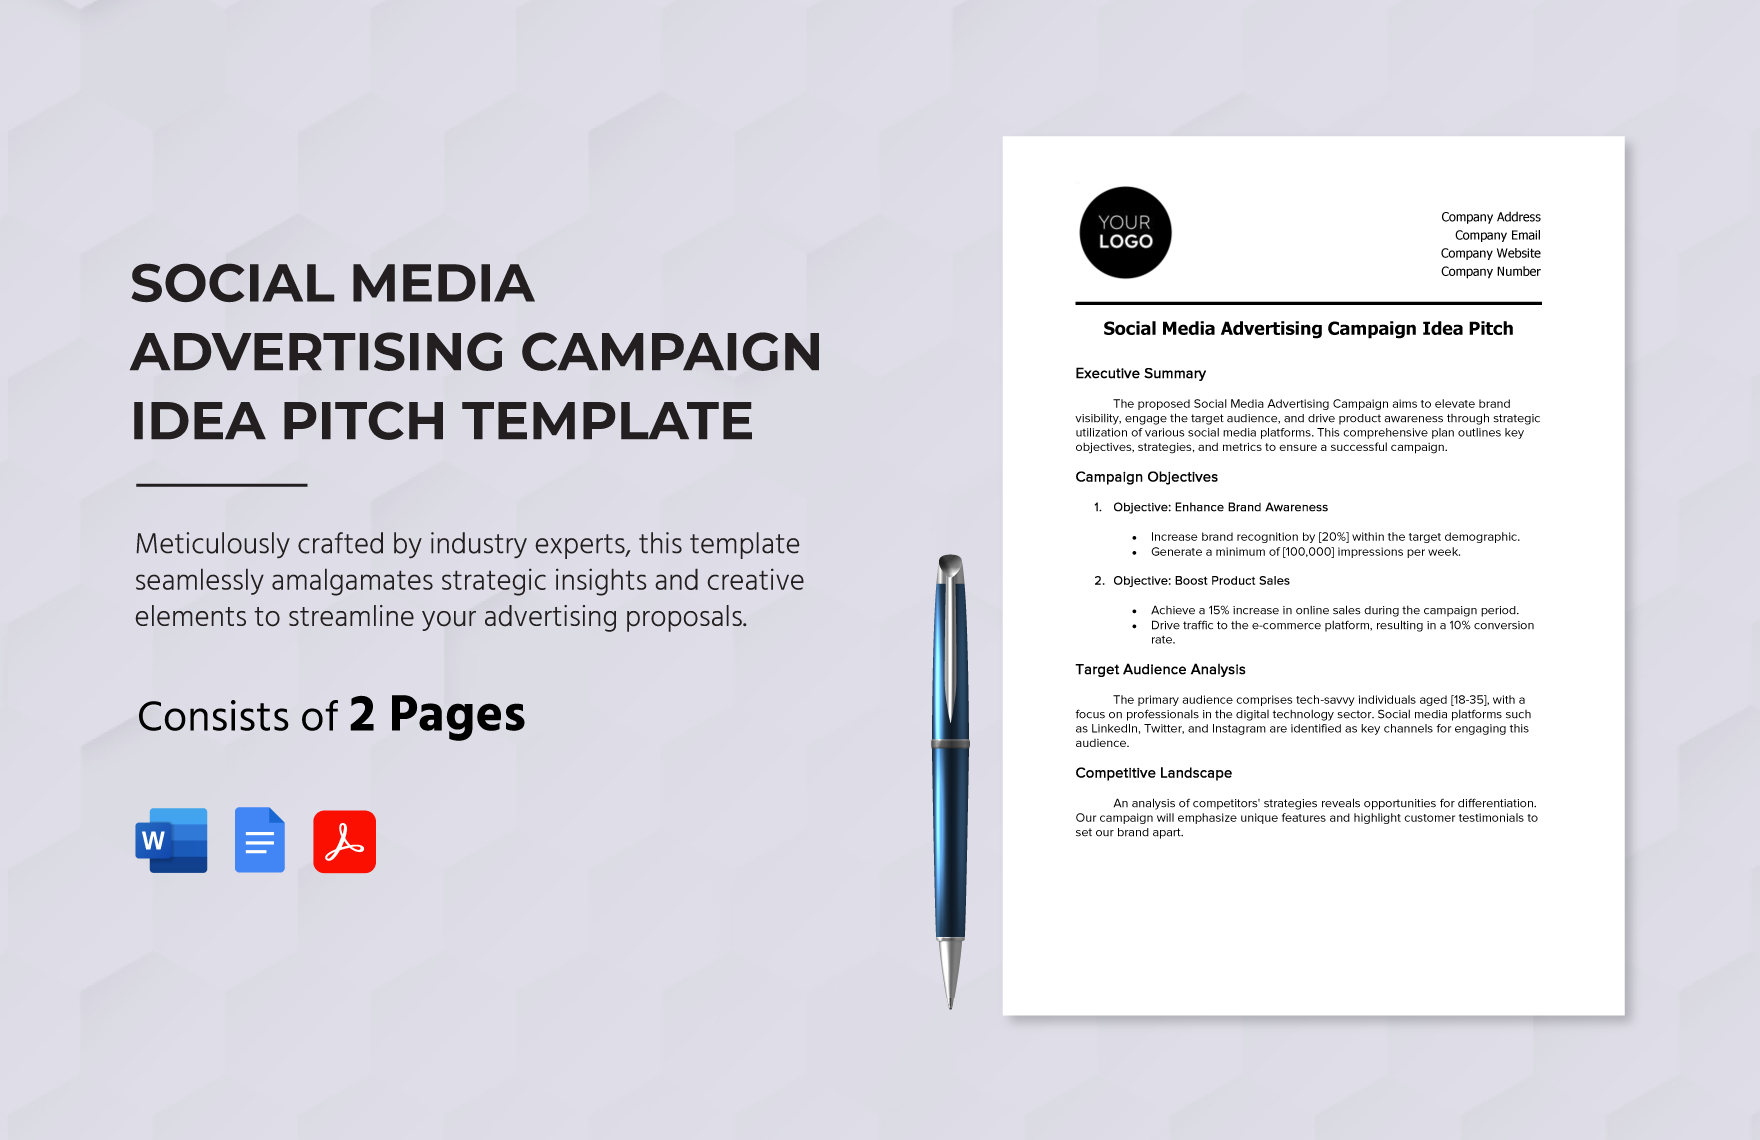 Social Media Advertising Campaign Idea Pitch Template in Word, Google Docs, PDF